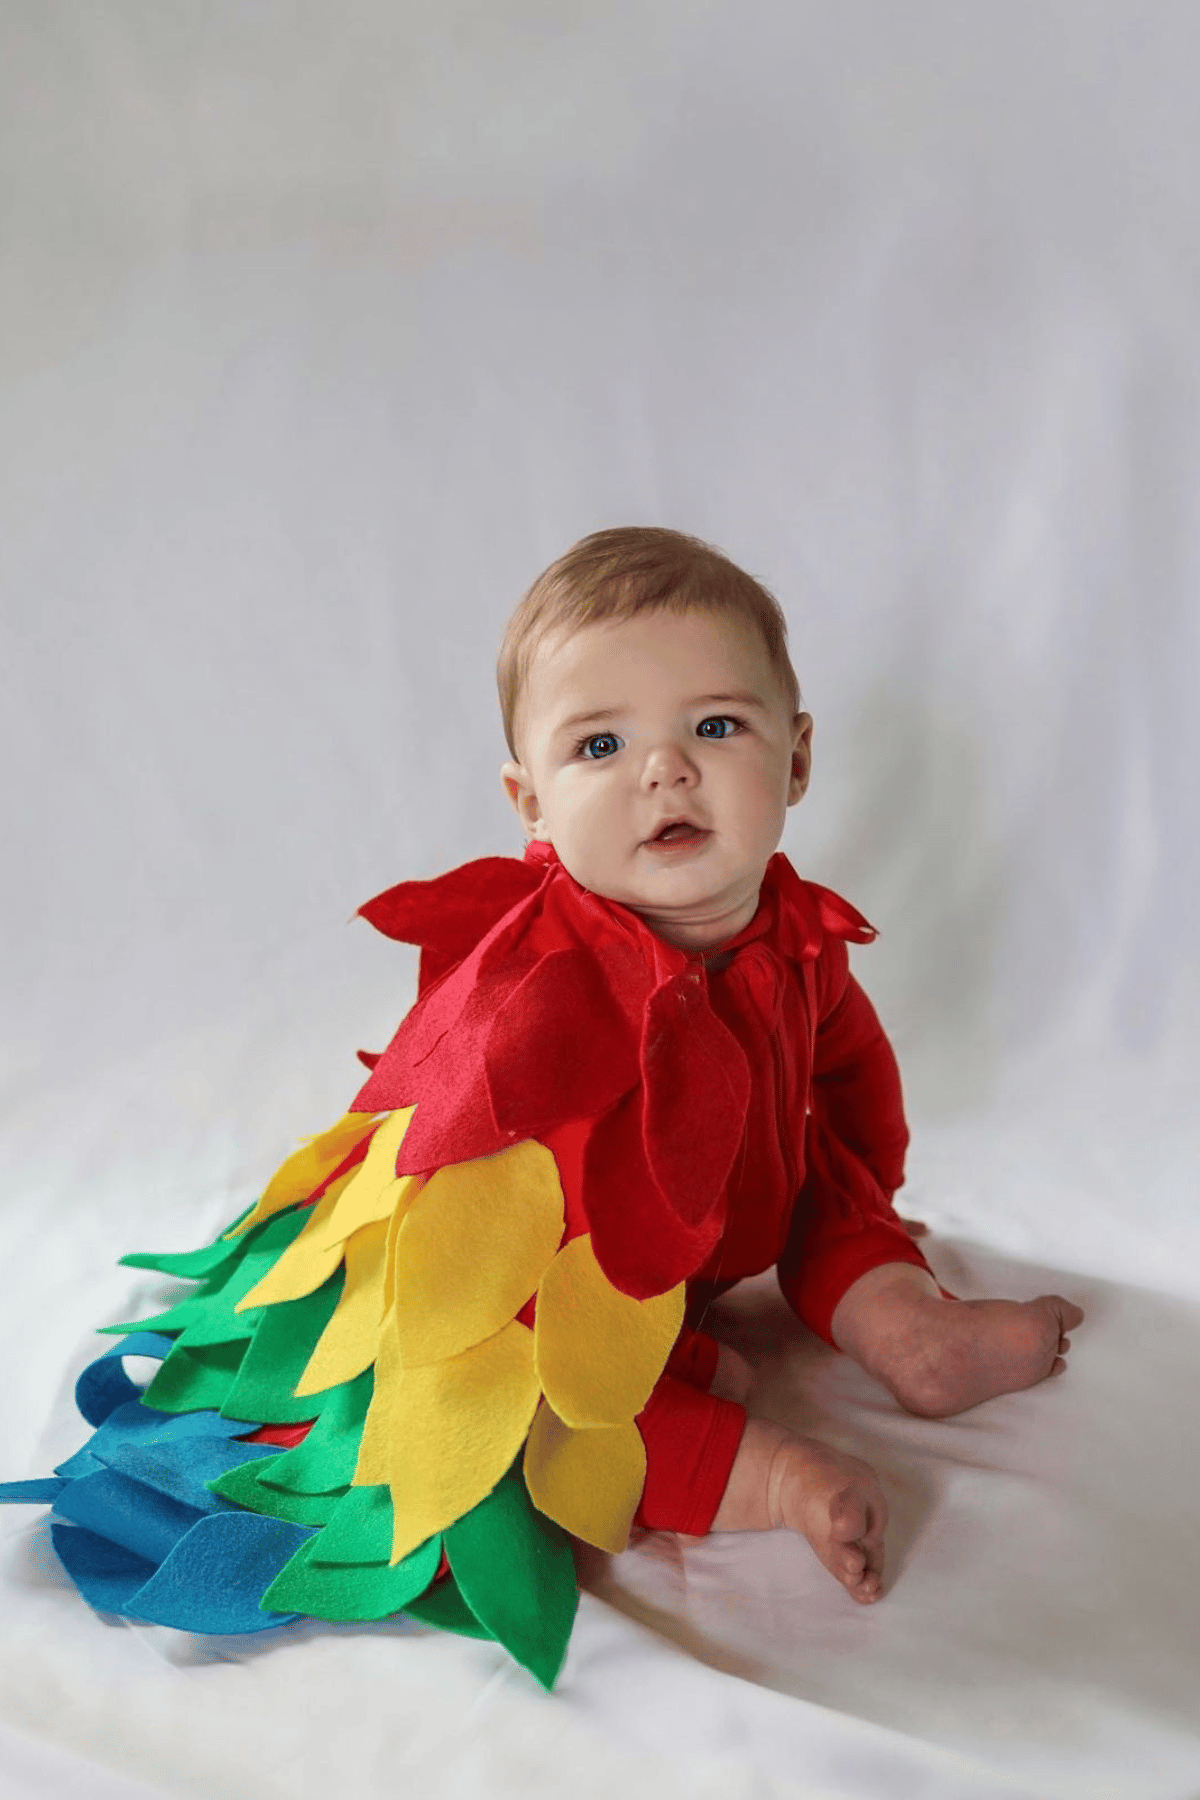 Baby dressed as a parrot with red, yellow, green and blue felt feathers